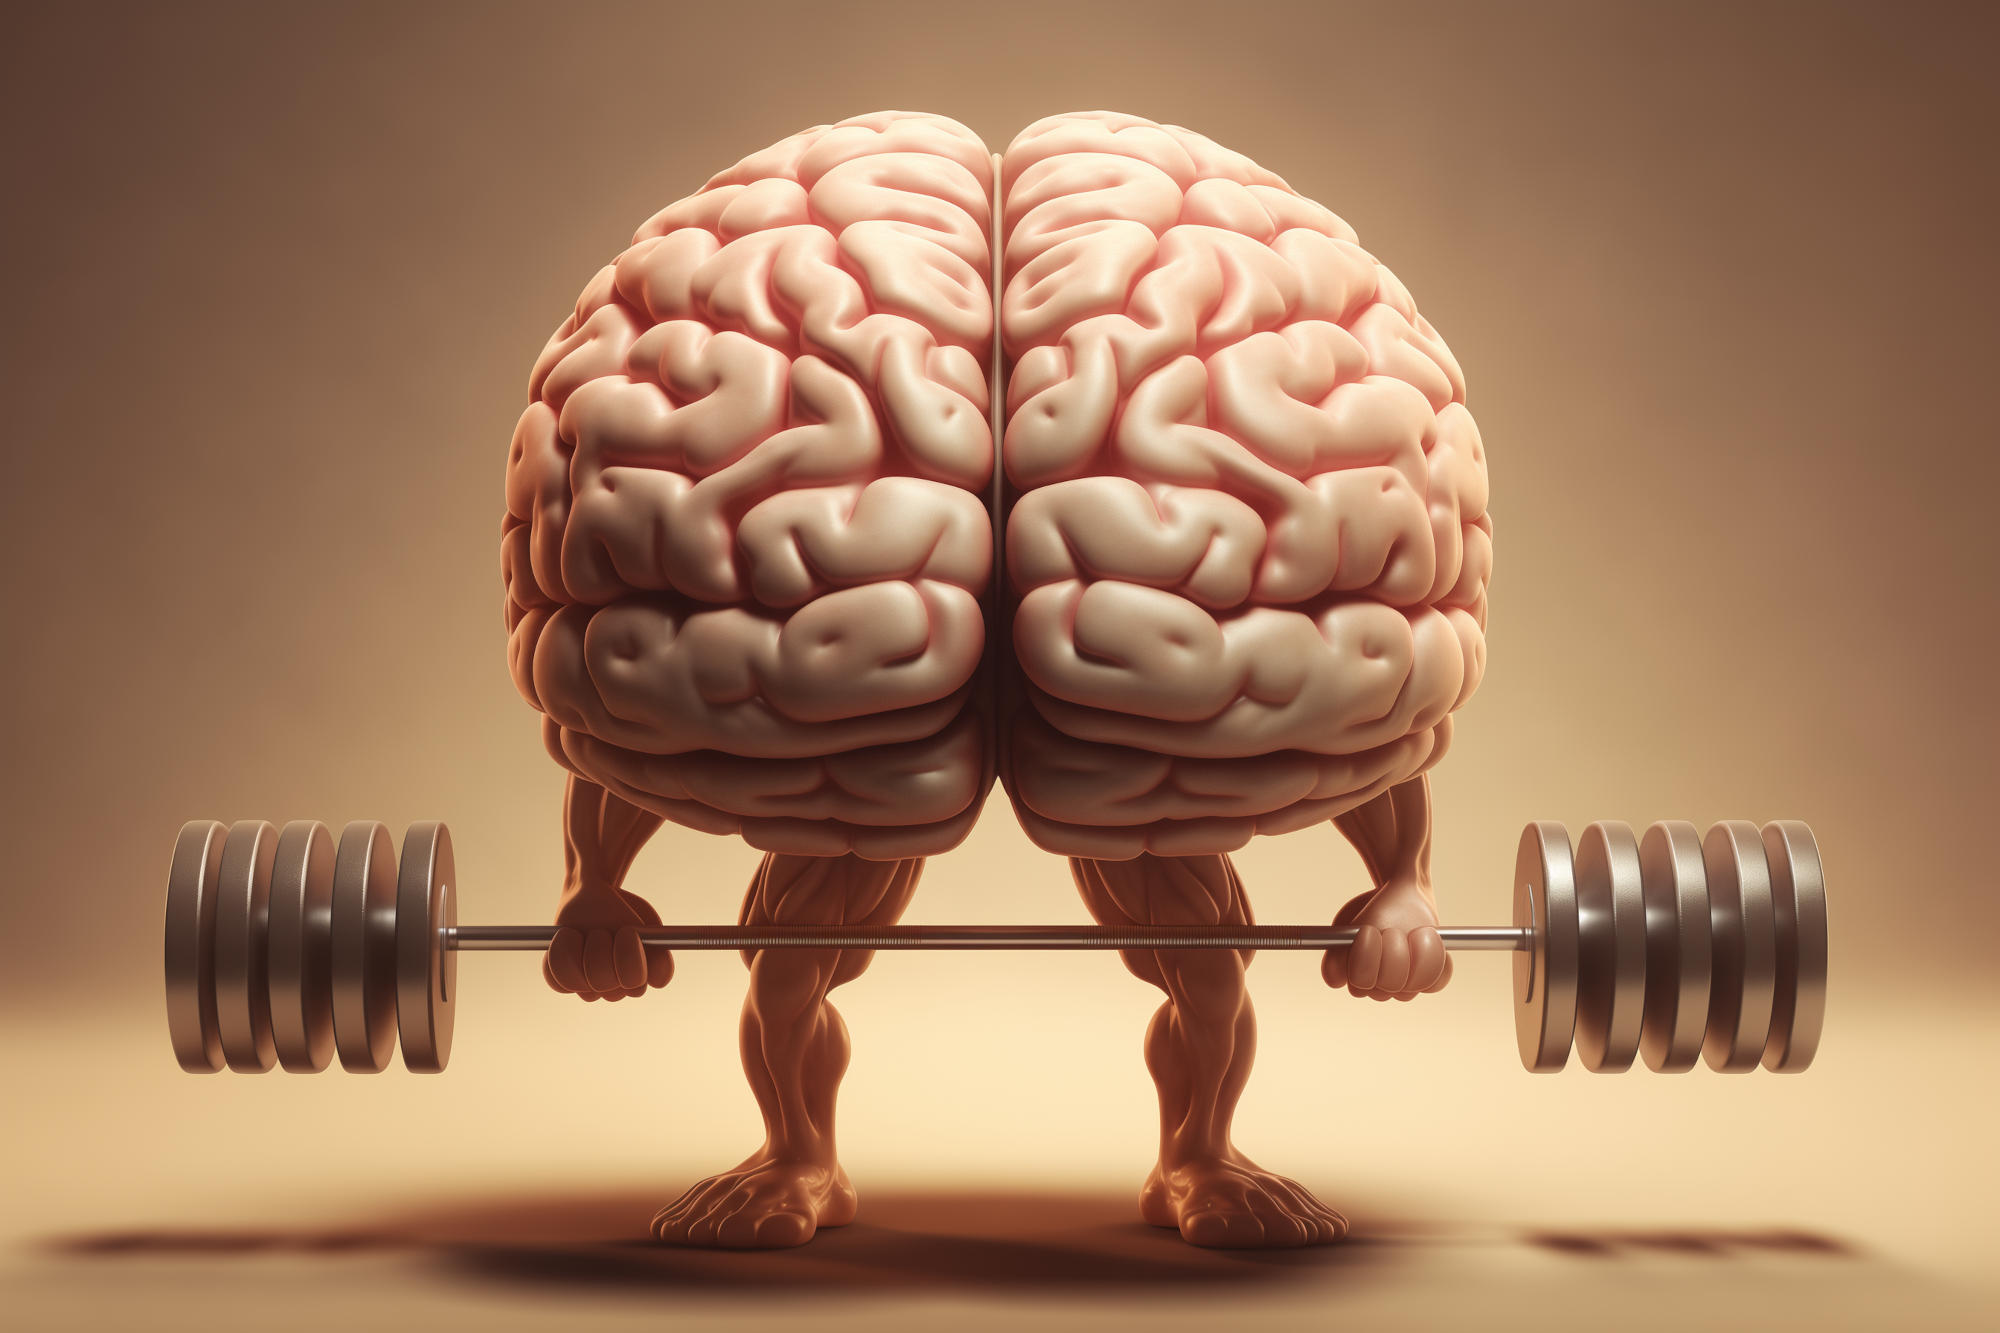 New Study Links Physical Labor to Cognitive Impairment